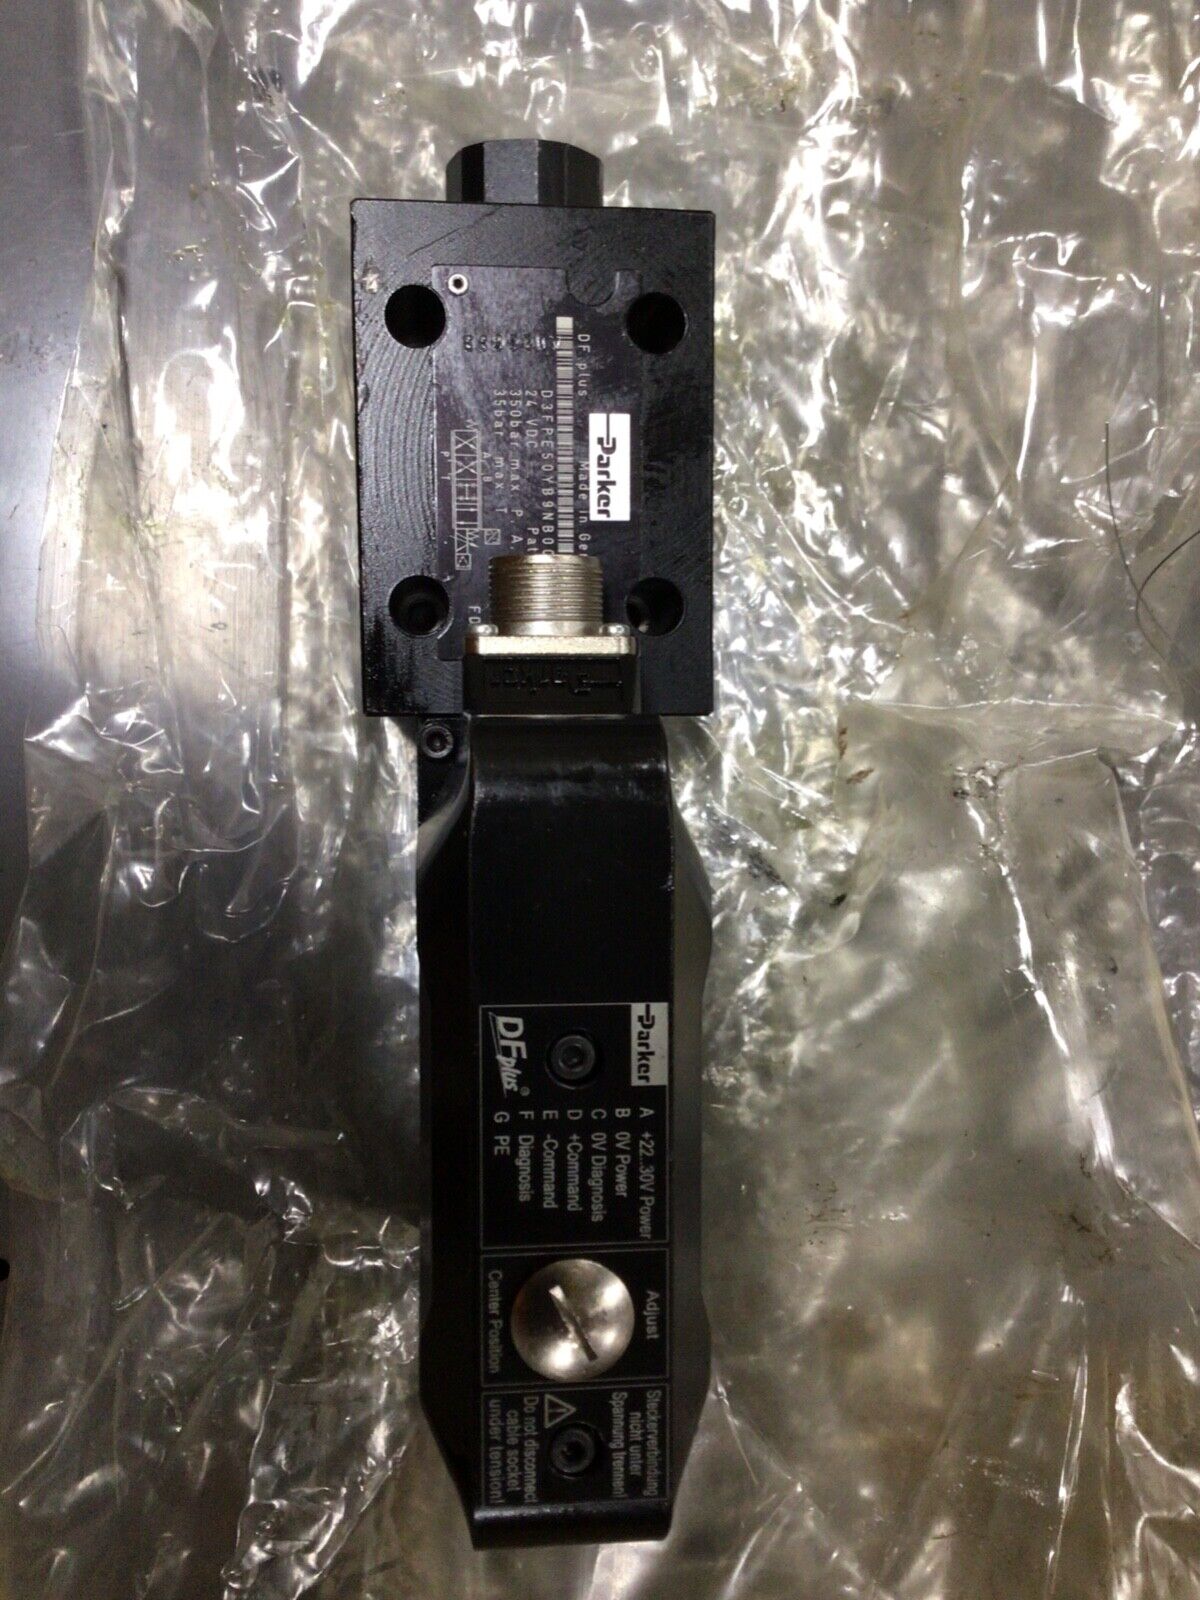 NEW PARKER DF PLUS PROPORTIONALY HYDRAULIC VALVE D3FPE50YB9NB00